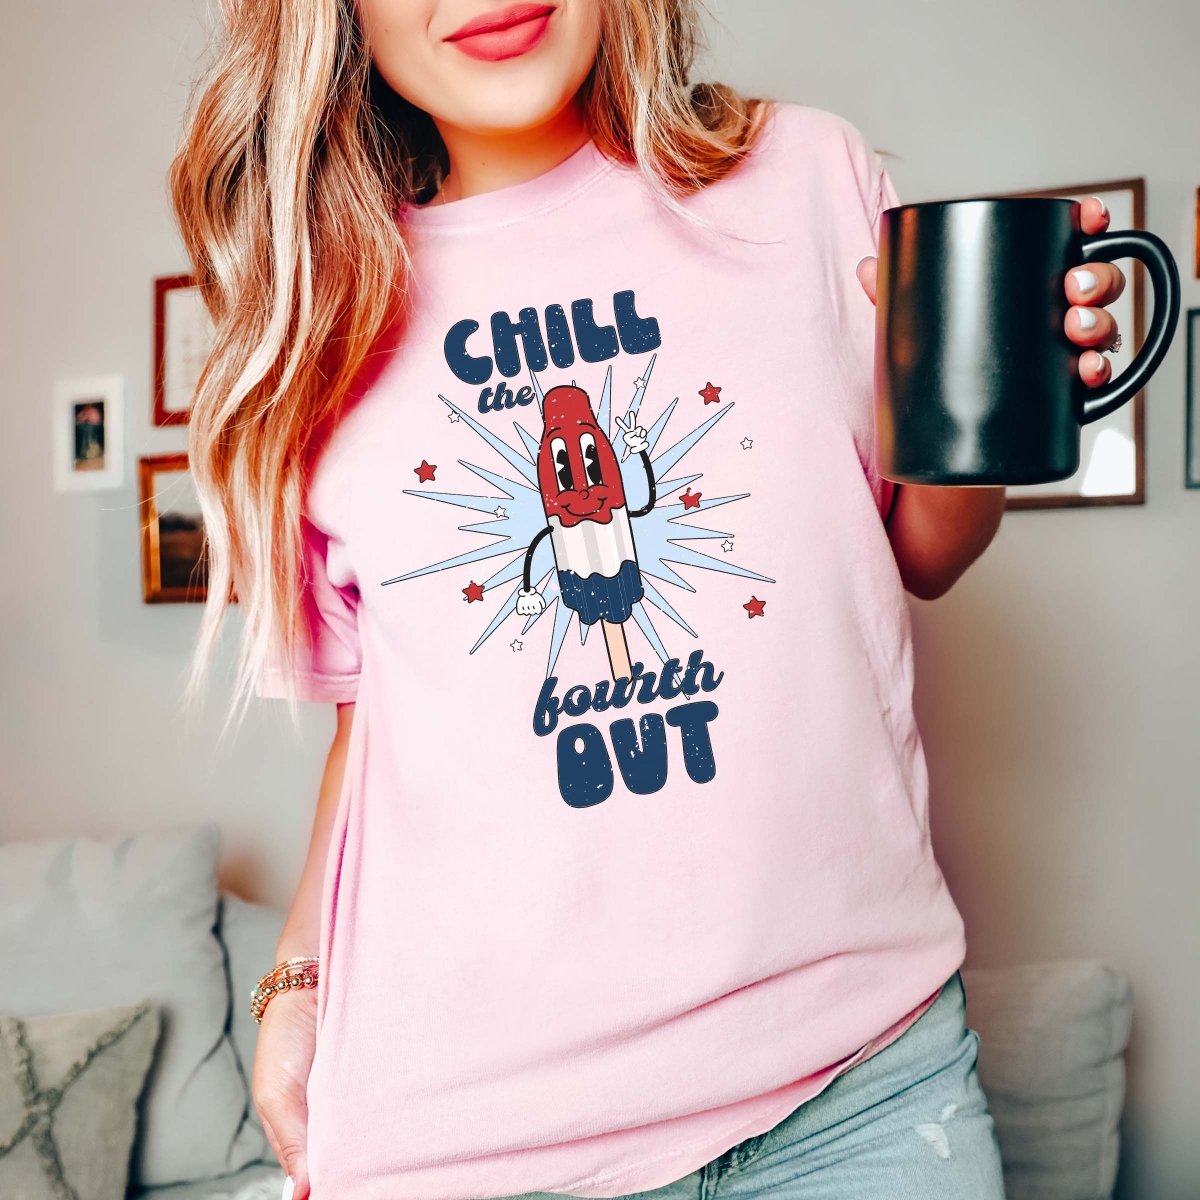 Chill the fourth out Comfort Color Tee - Limeberry Designs